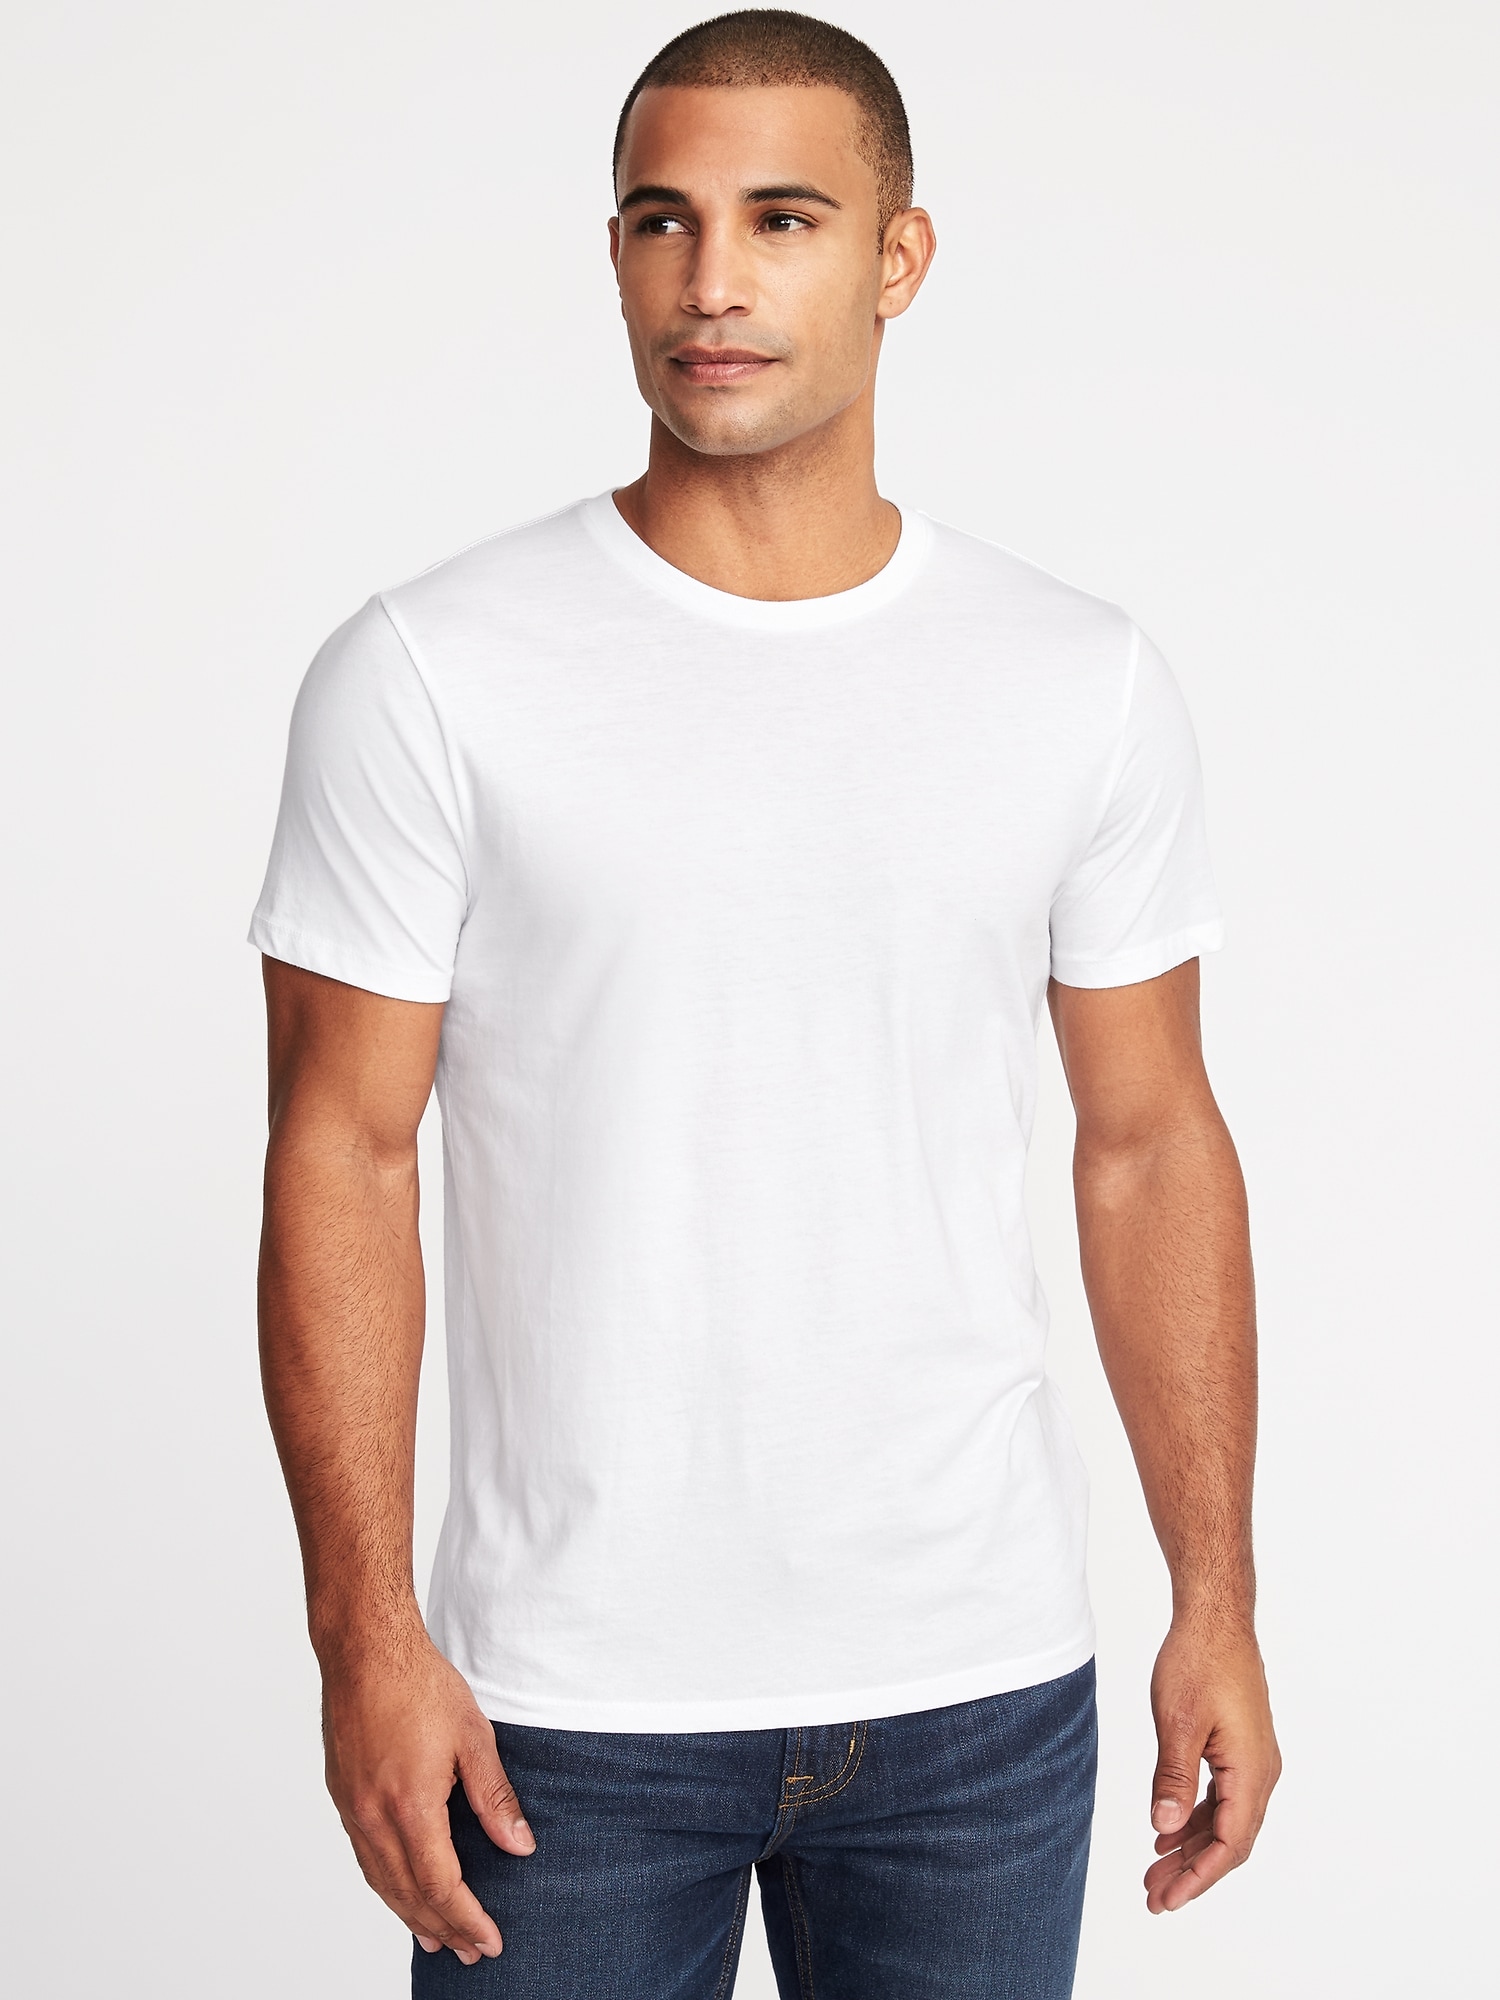 old navy t shirts india